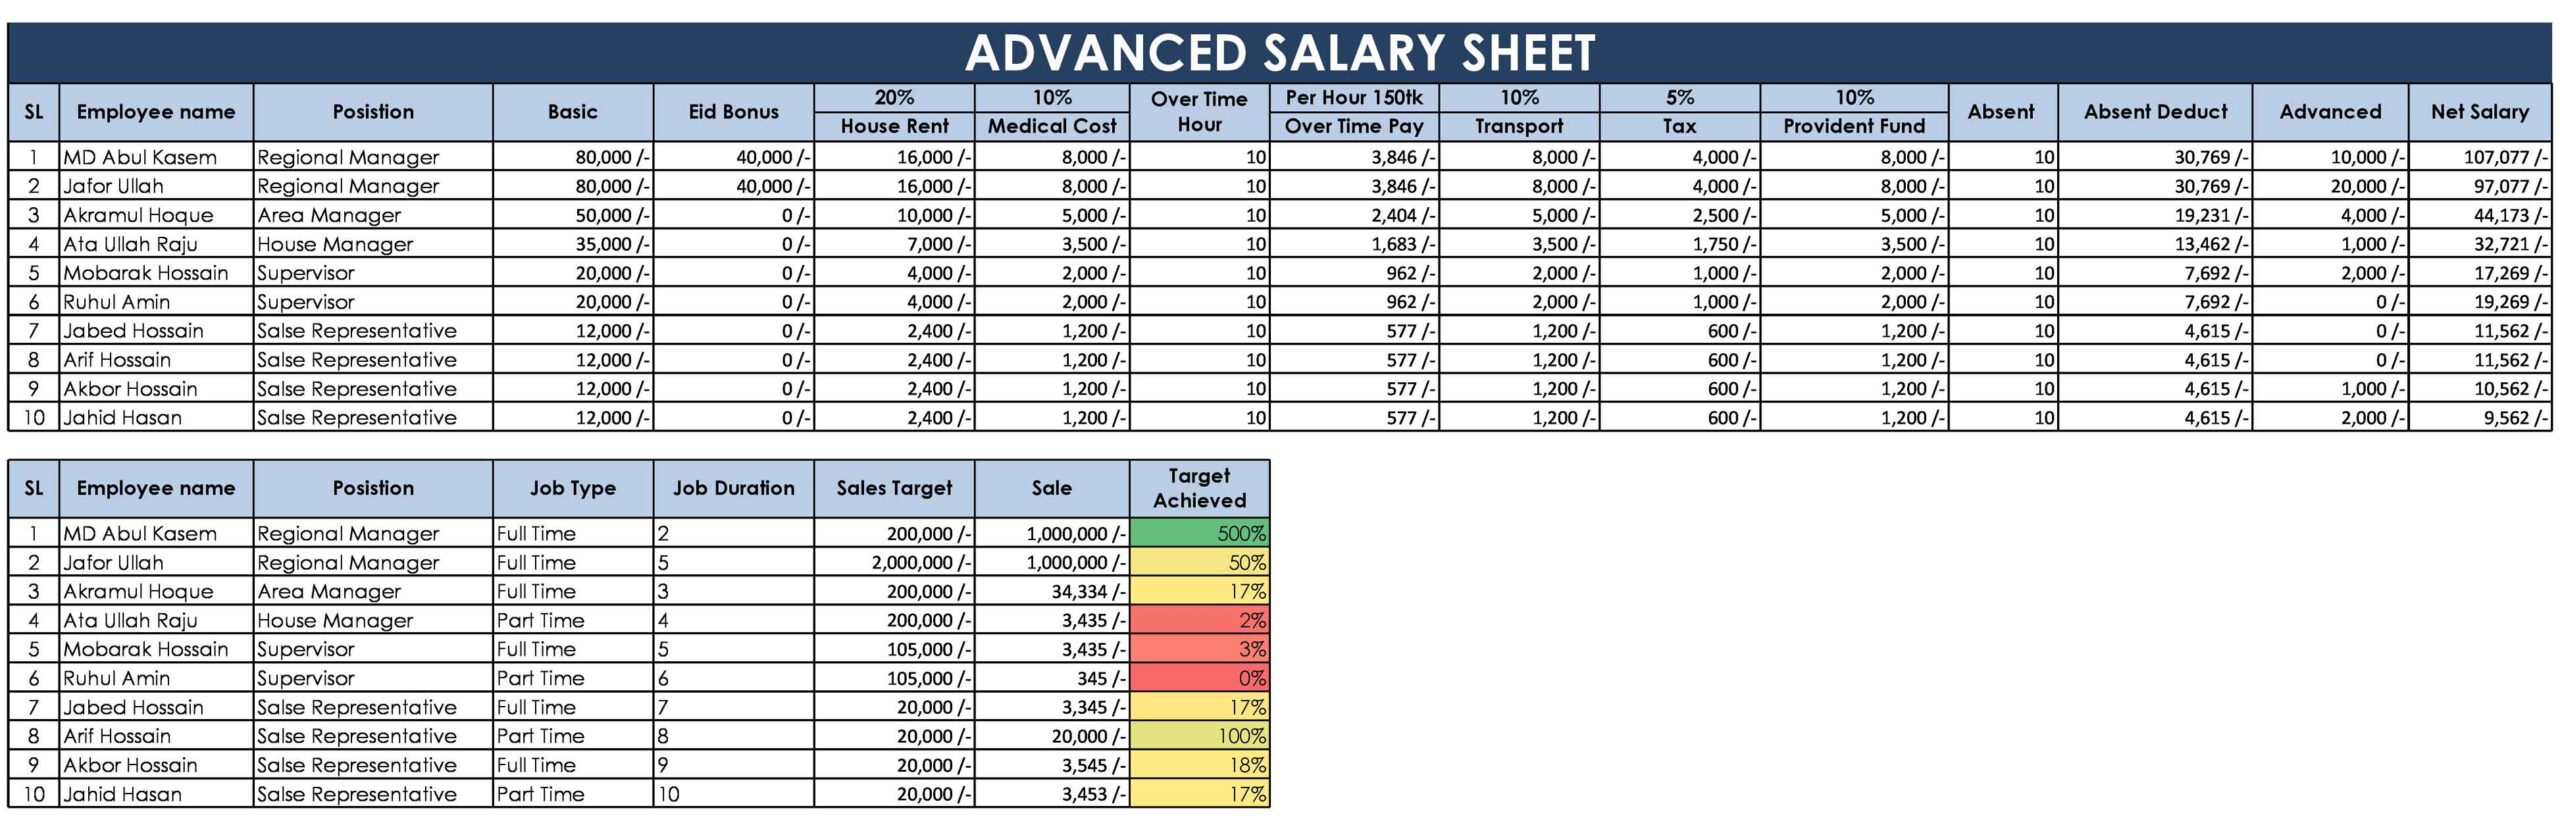 Advanced Salary Sheet using MS Excel